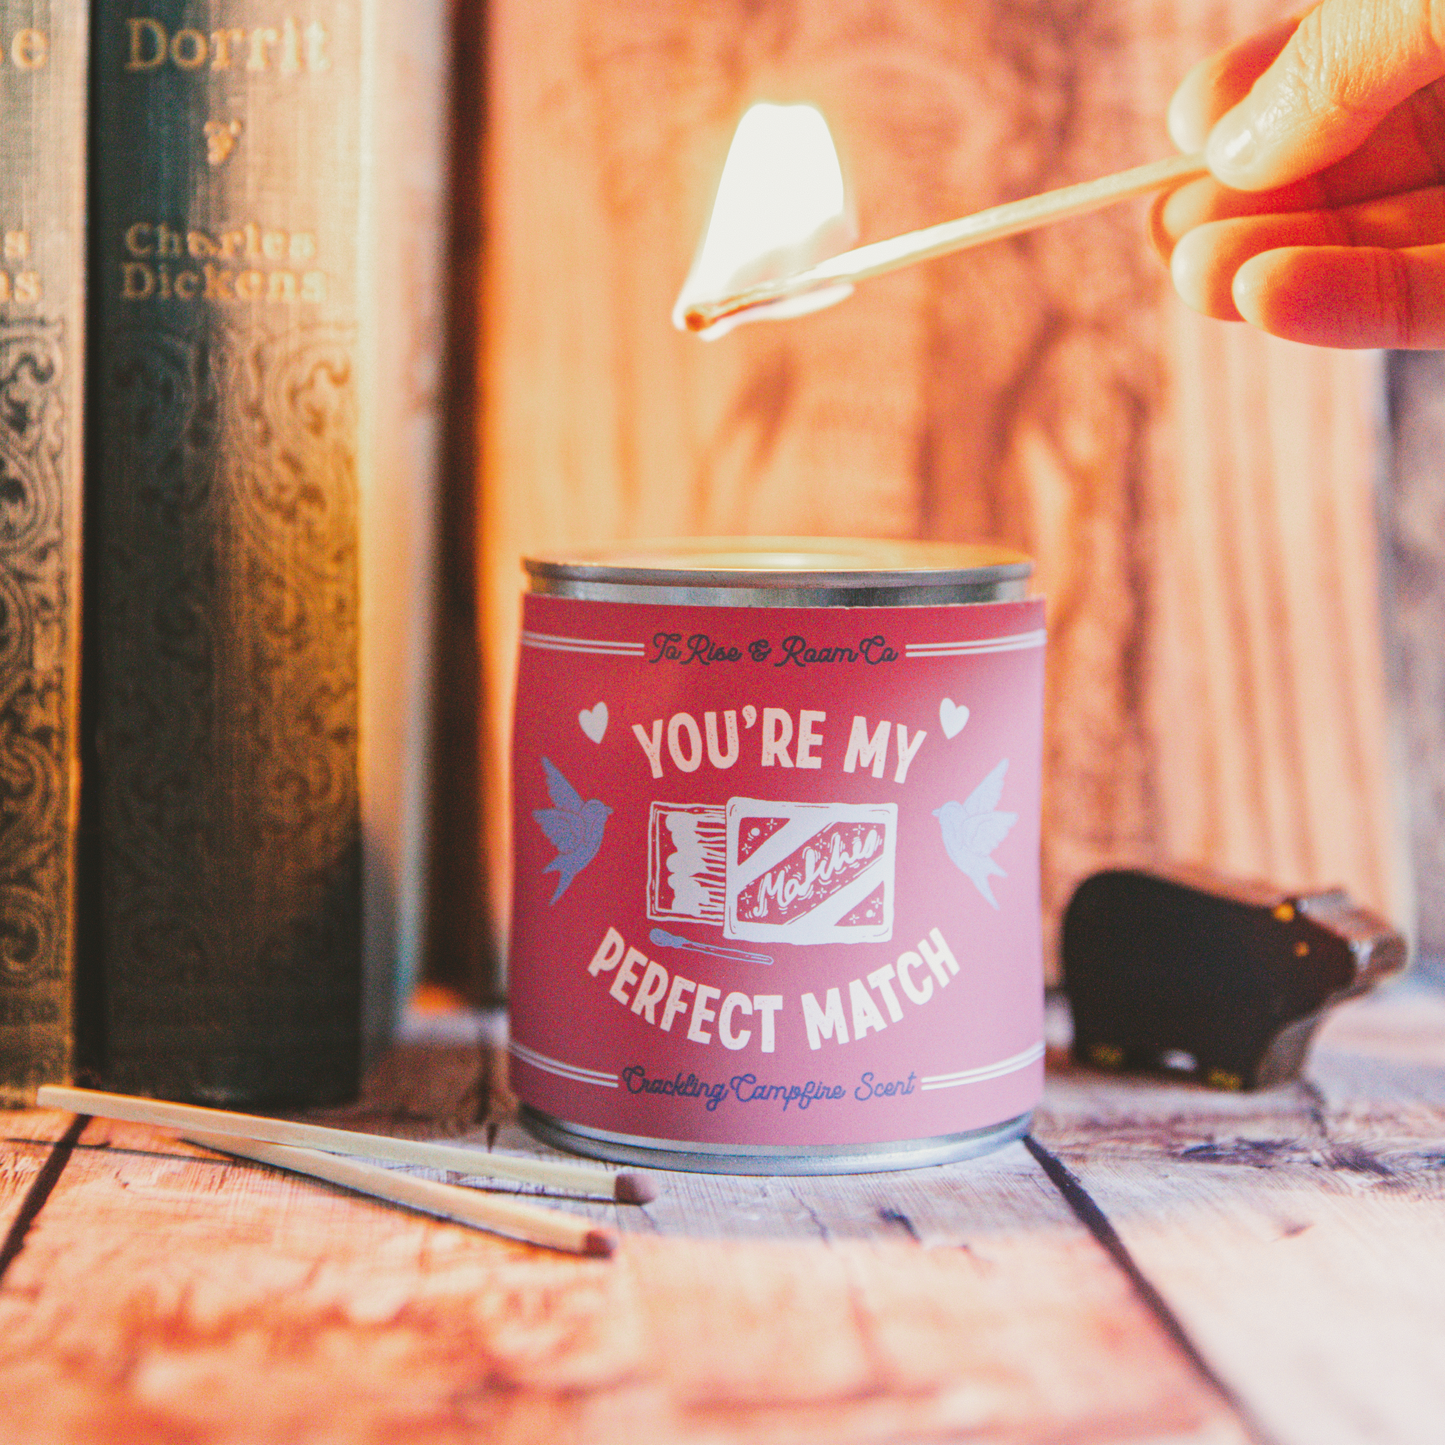 The Perfect Match Soy Wax Valentines Candle